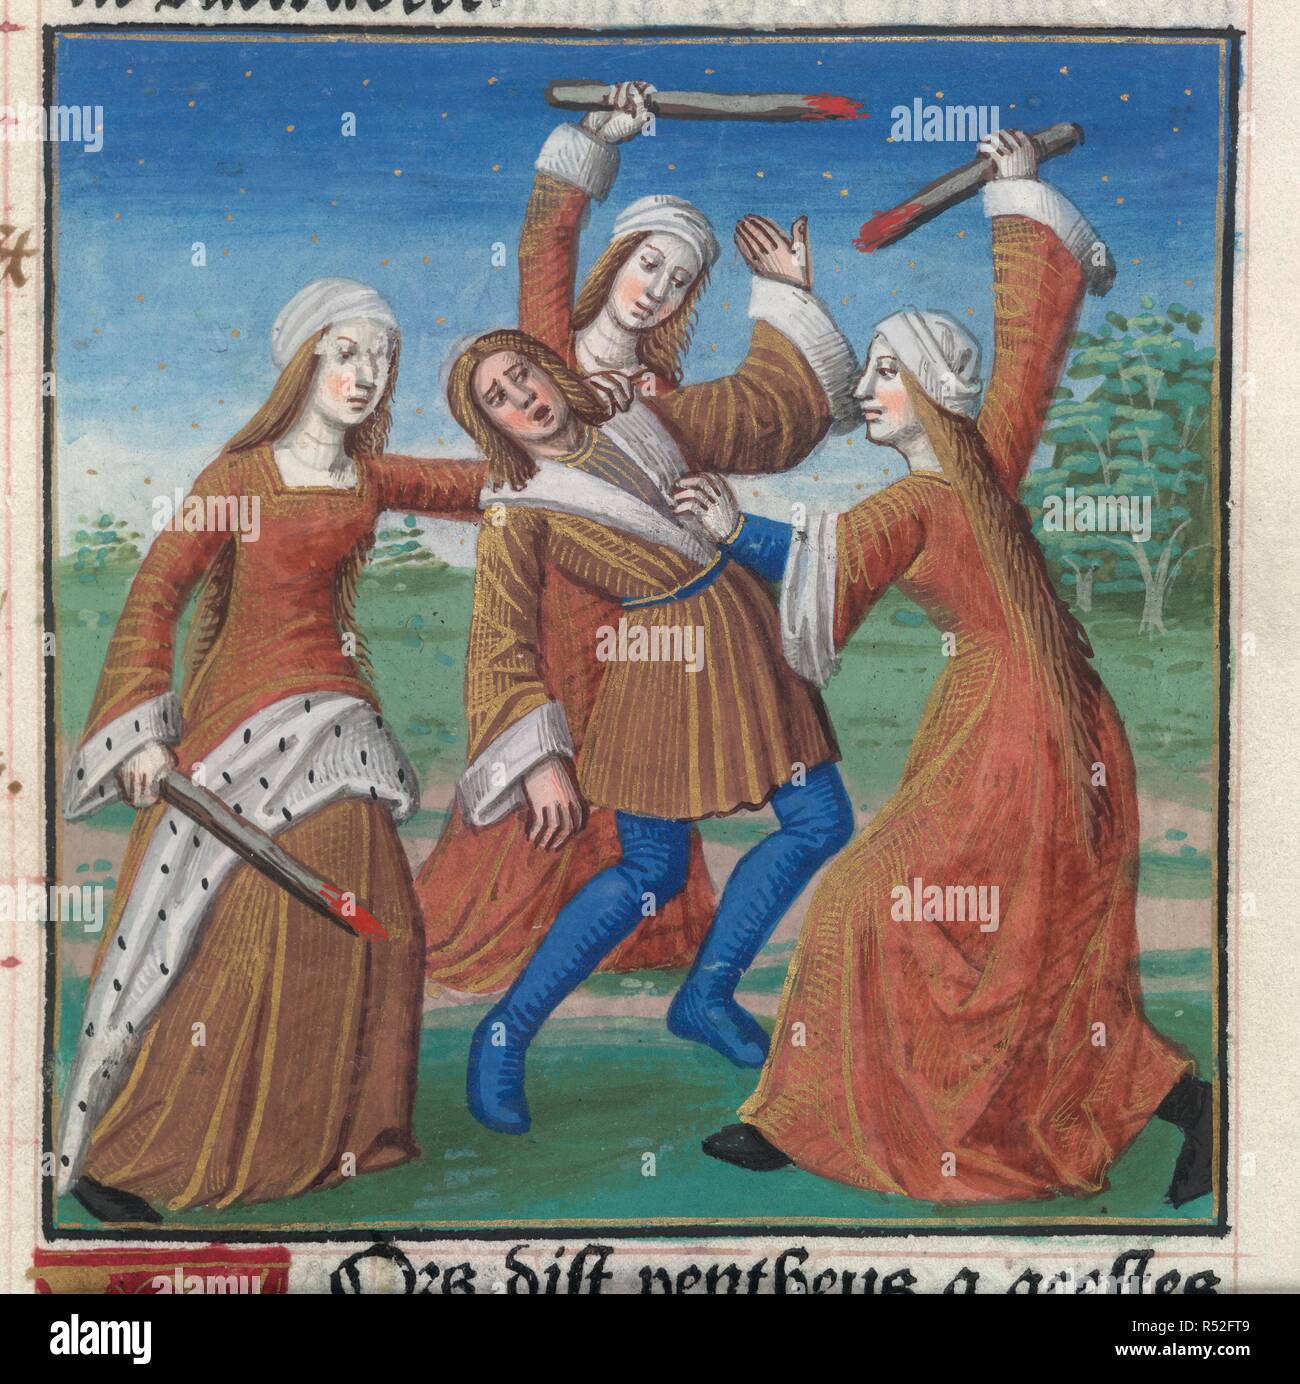 The death of Pentheus. Metamorphoses. Antoine VÃ©rard: Paris, 1494. (Miniature only) The death of Pentheus. Agave, with her sisters Auntonoe and Ino, murders her son Pentheus on Mt. Cithaeron after he disturbs their Bacchic rites. Source: IC.41148, XXXIV. Language: French. Stock Photo